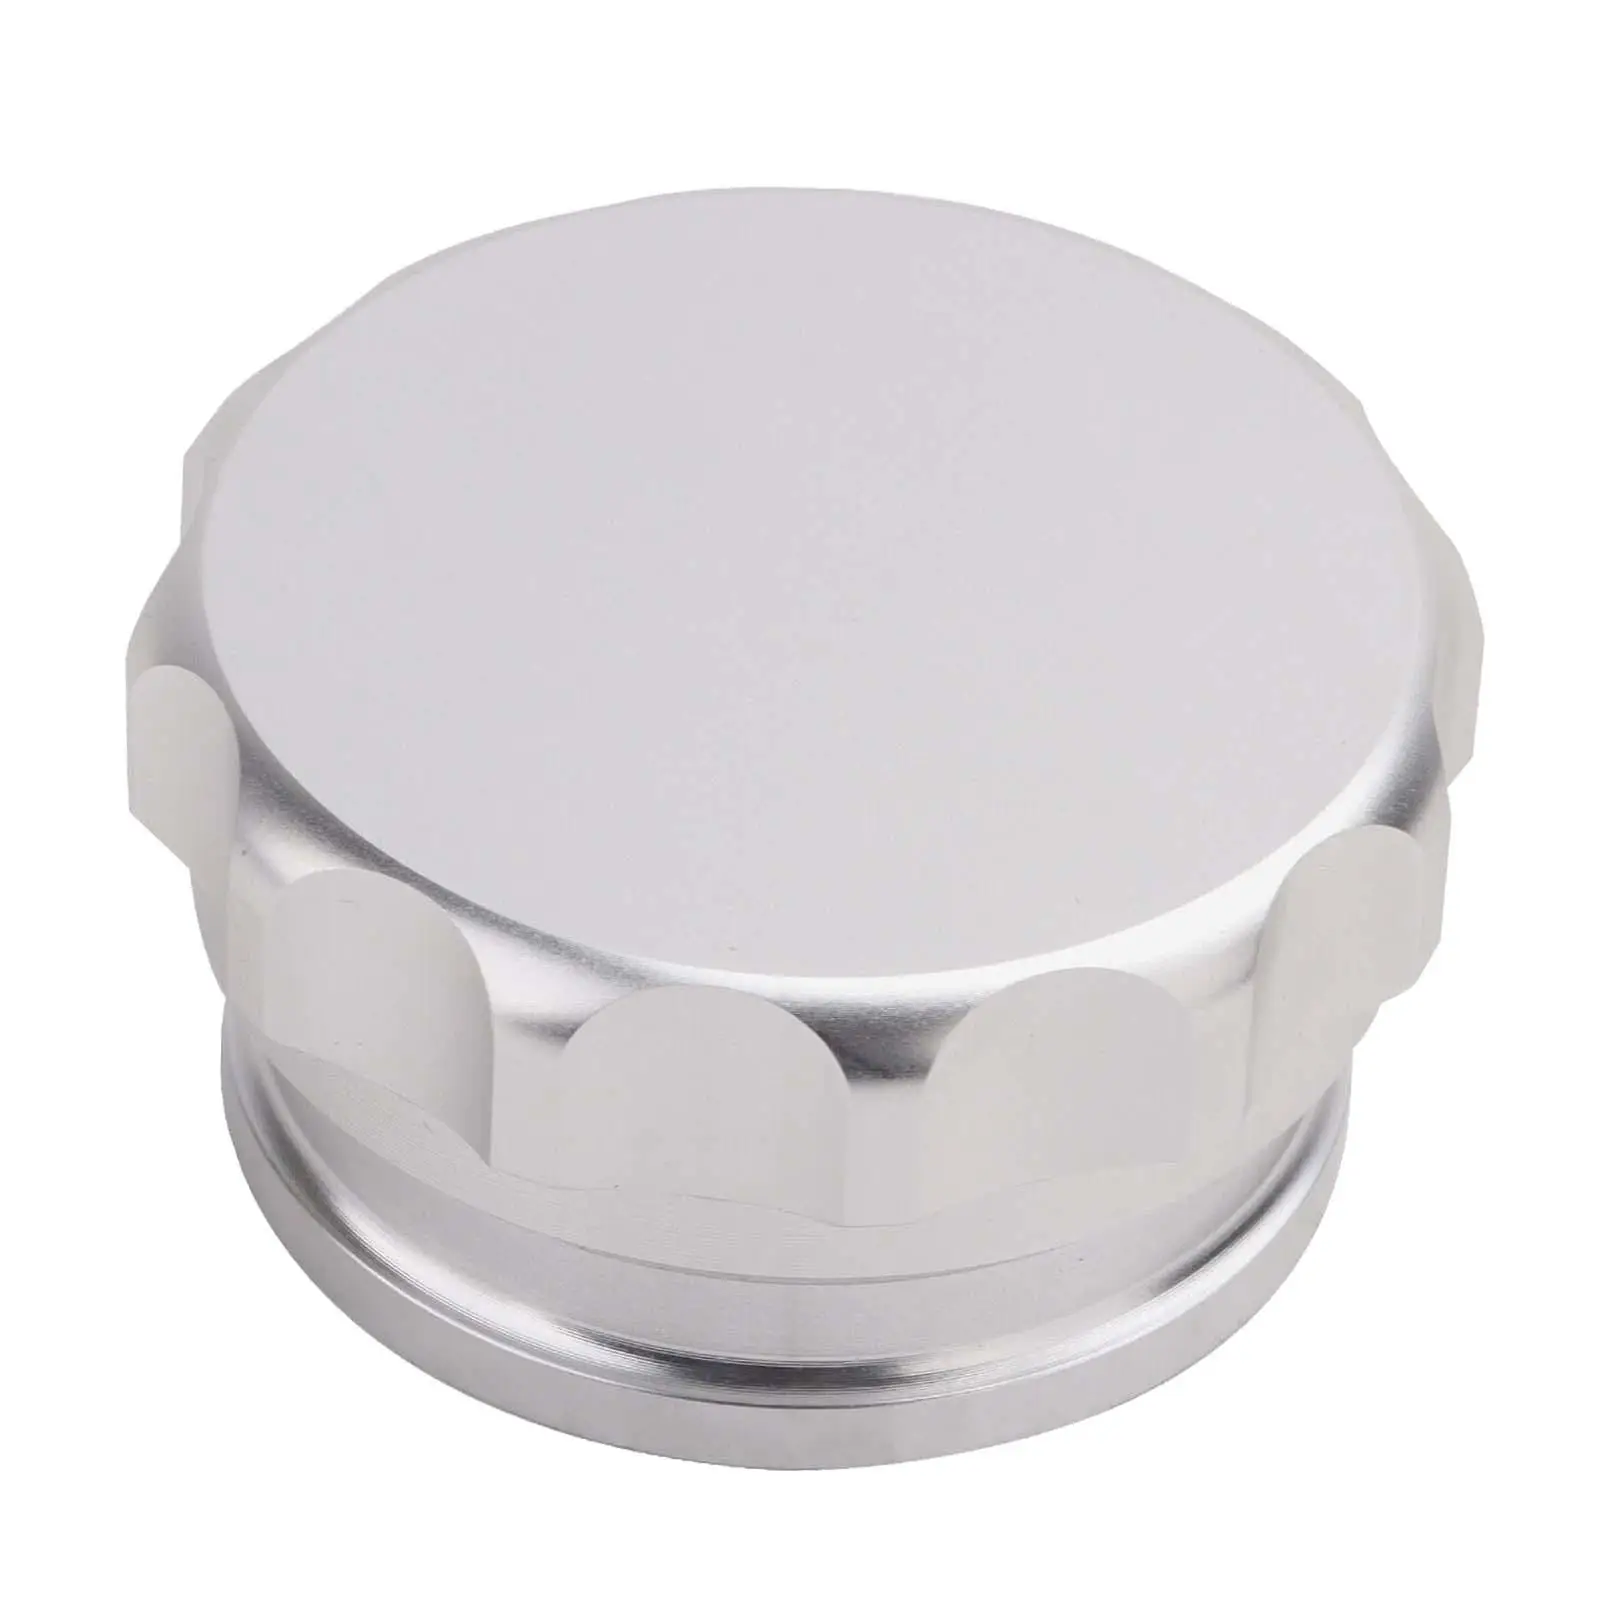 Weldable filler cap, easy to install aluminum alloy car accessories, high